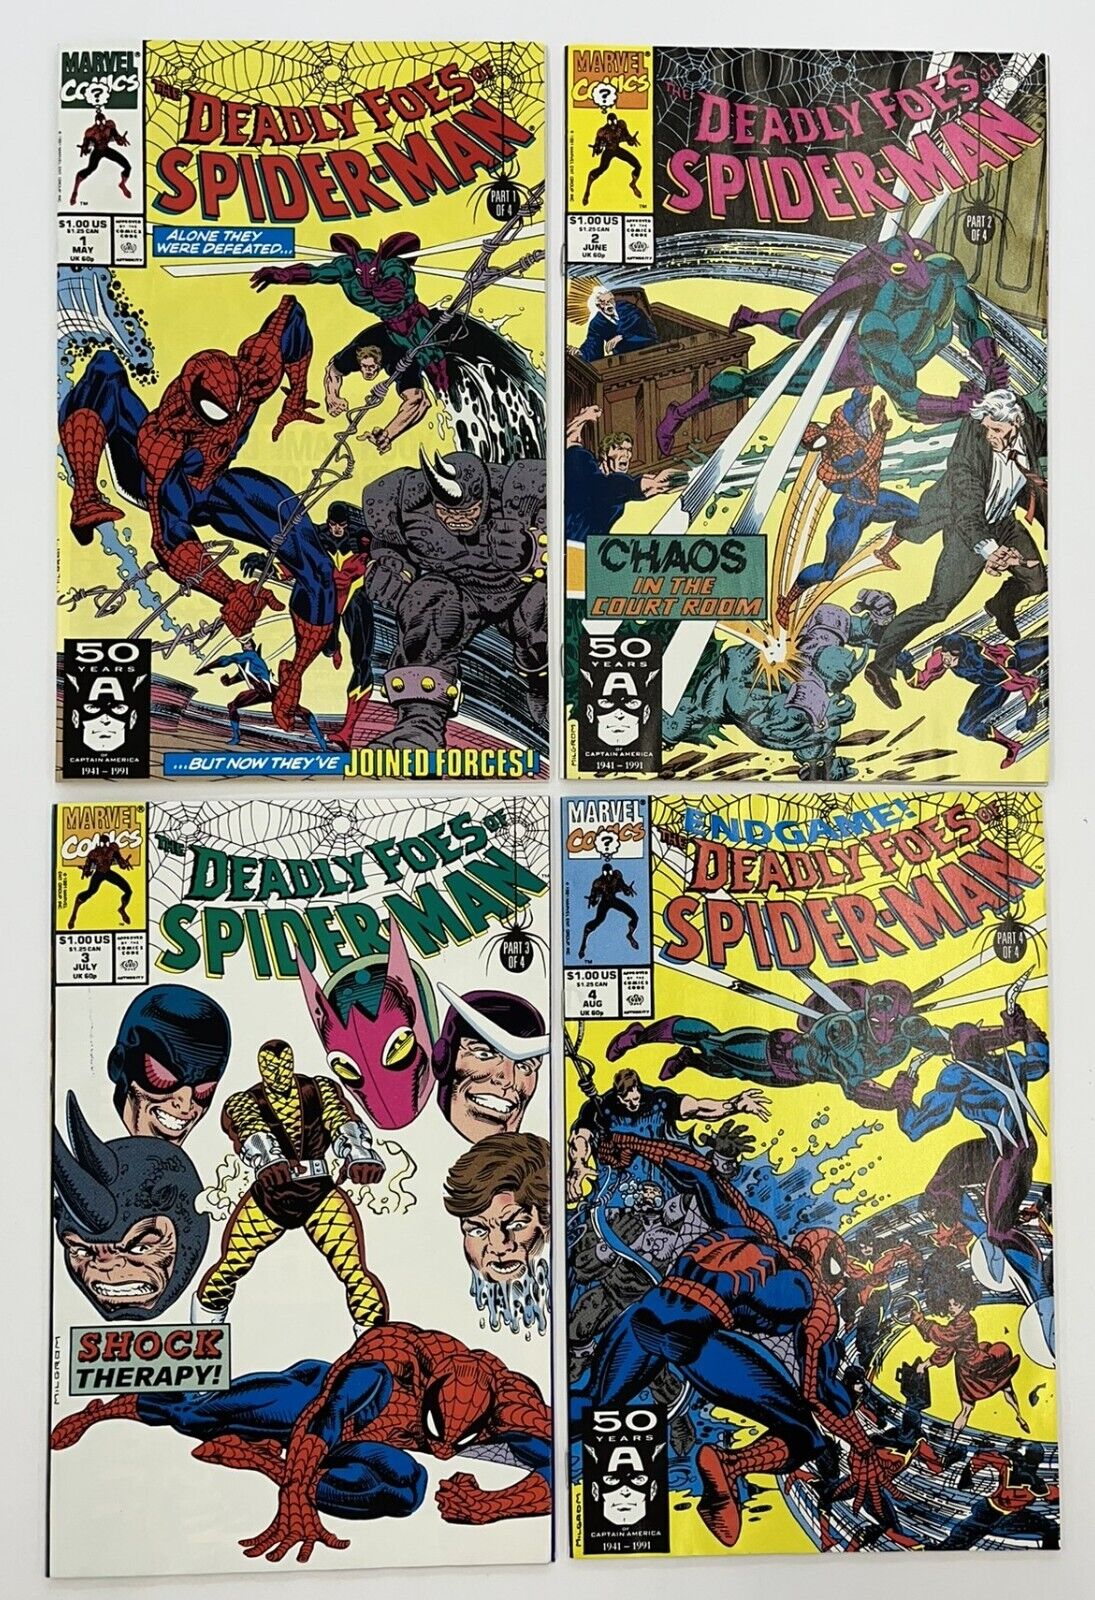 Marvel Comics: Deadly Foes of Spider-Man #1-4 1991 limited mini series